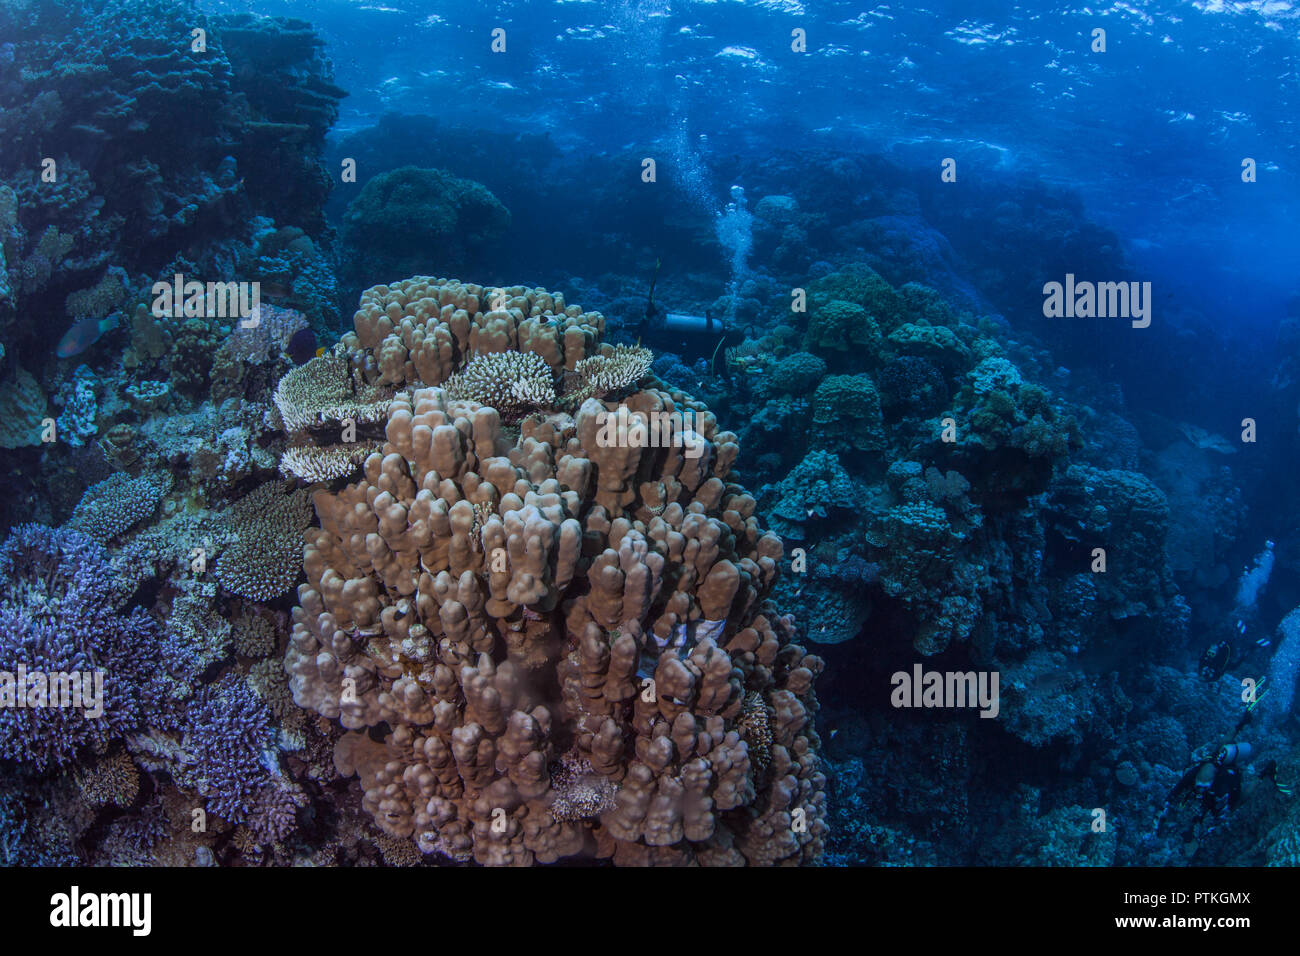 Scuba divers explore coral garden hidden inside towering pinnacles in the Fury Shoals area of the Red Sea. Stock Photo